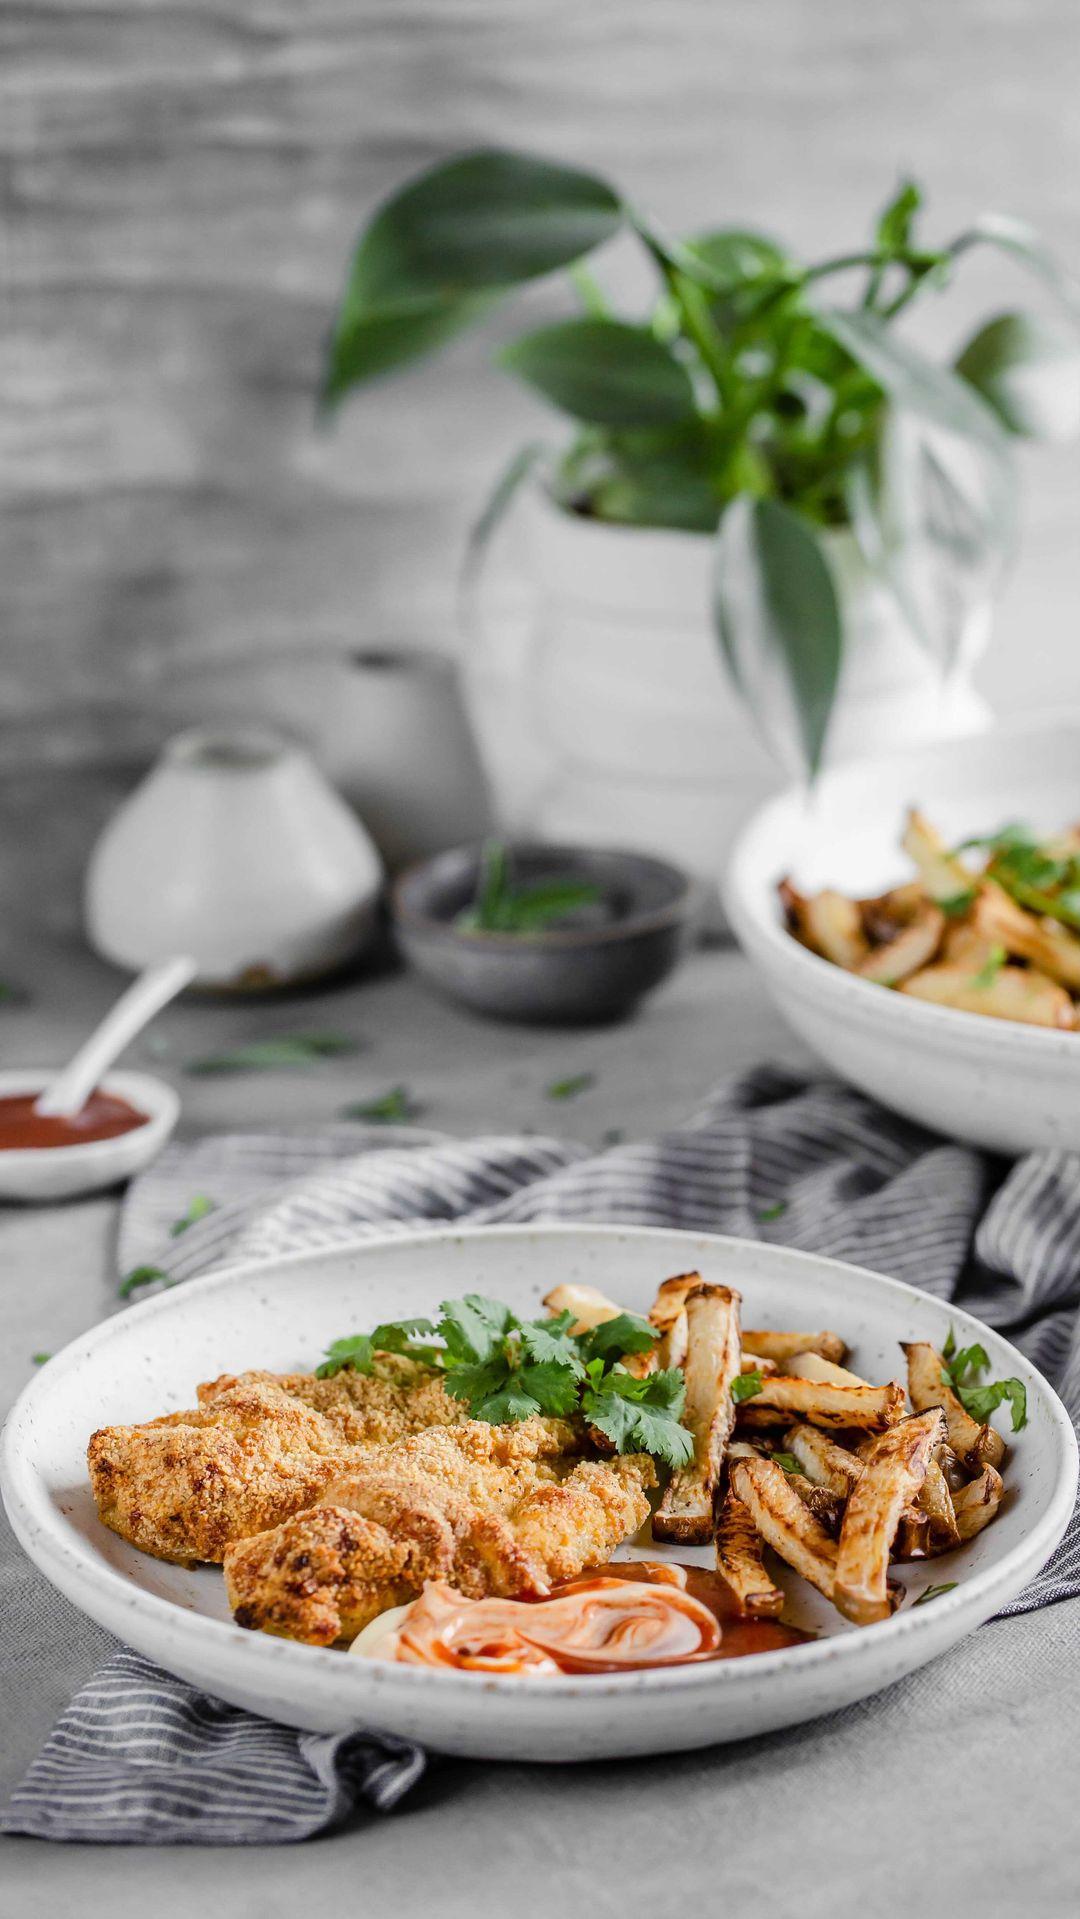 Chicken Milanese is basically a fancy term for fried chicken. You’d never guess that this recipe was low-carb! 😱 

Recipe by: @thecastawaykitchen and you can find it on dietdoctor.com (recipe link is also in our stories for the next 24 hours!) 
.
.
.
.
.
.
.
.
#lowcarb #cooking #dietdoctor #healthy #comfortfood #lchf #glutenfree #ketodiet #ketogenic #fitfood #weightloss #keto #eatclean #food #healthyfood #tasty #ketofood #ketodinner #foodie #recipes #lowcarblife #lowcarbideas #lowcarbcooking #lowcarbfood #videorecipe #video